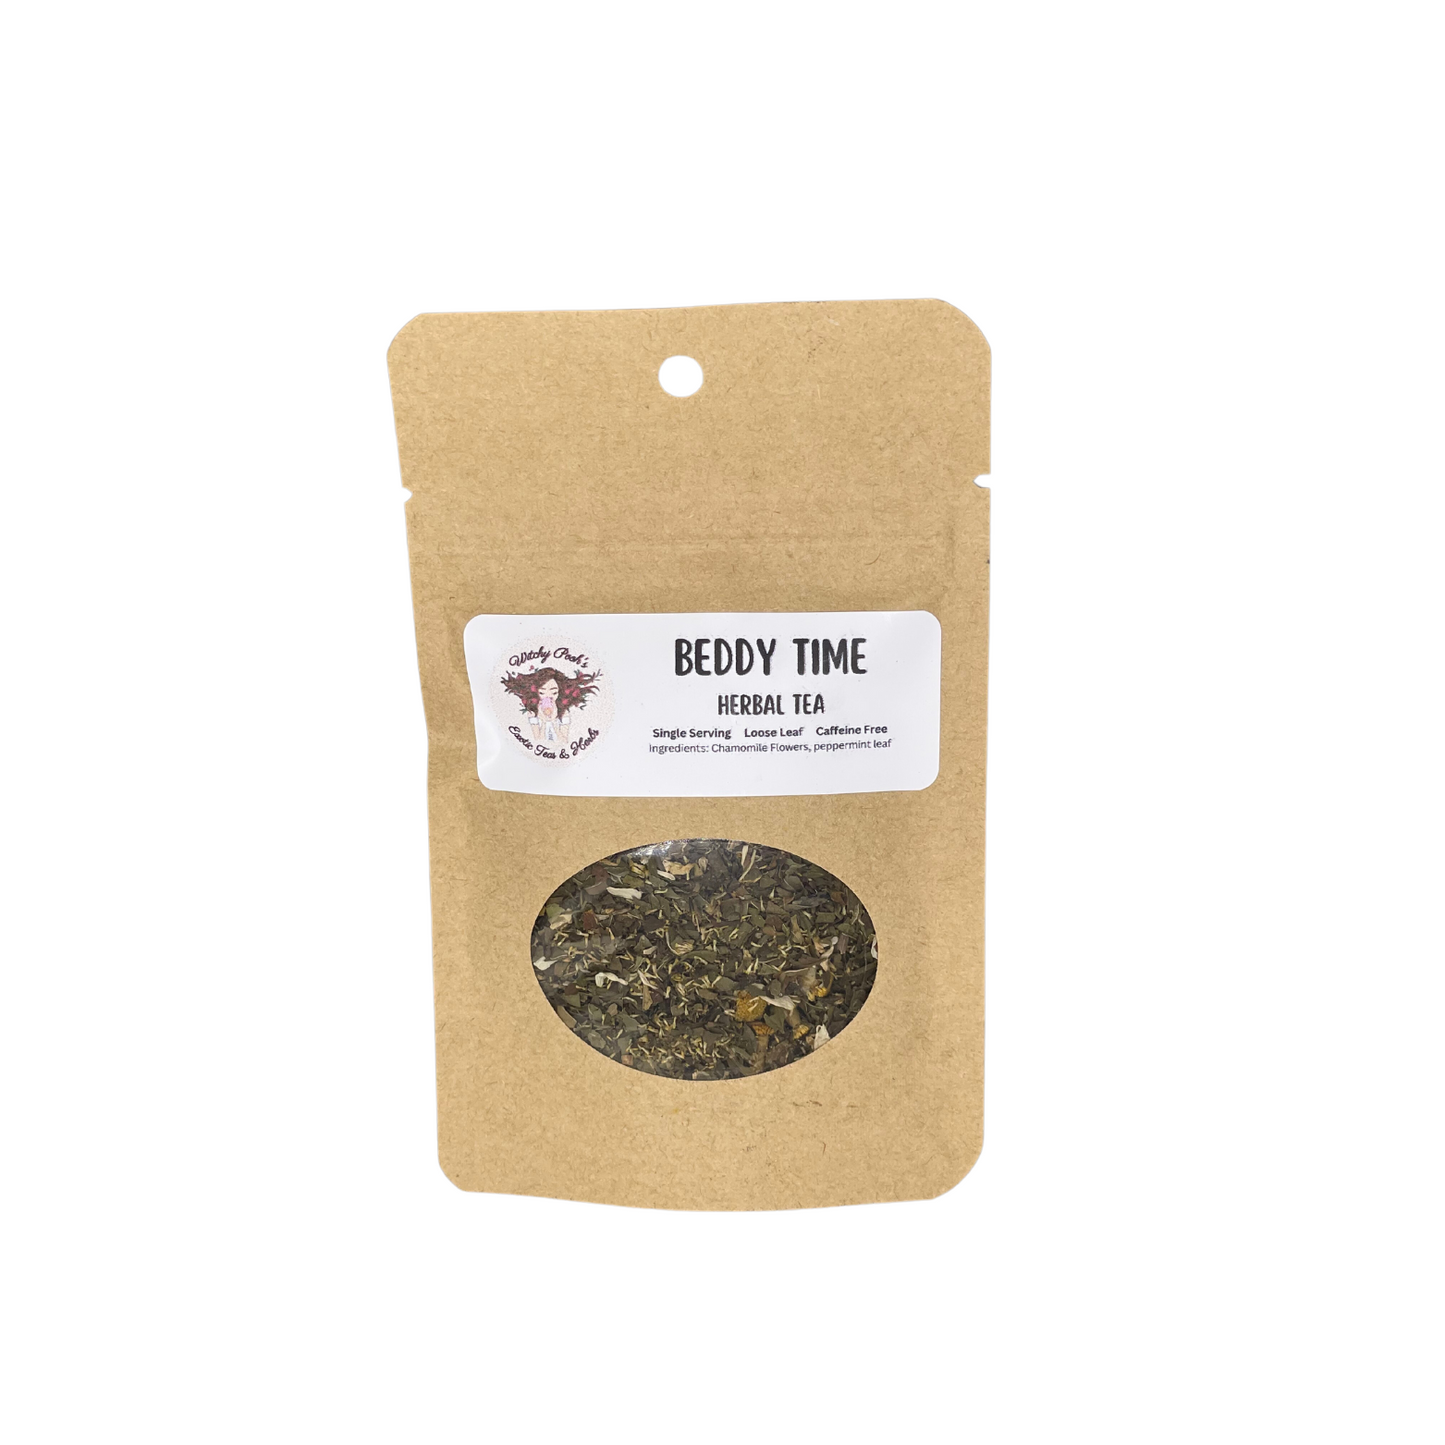 Witchy Pooh's Beddy Time Loose Leaf Herbal Chamomile Peppermint Tea, Caffeine Free, Natural Sleep Aid